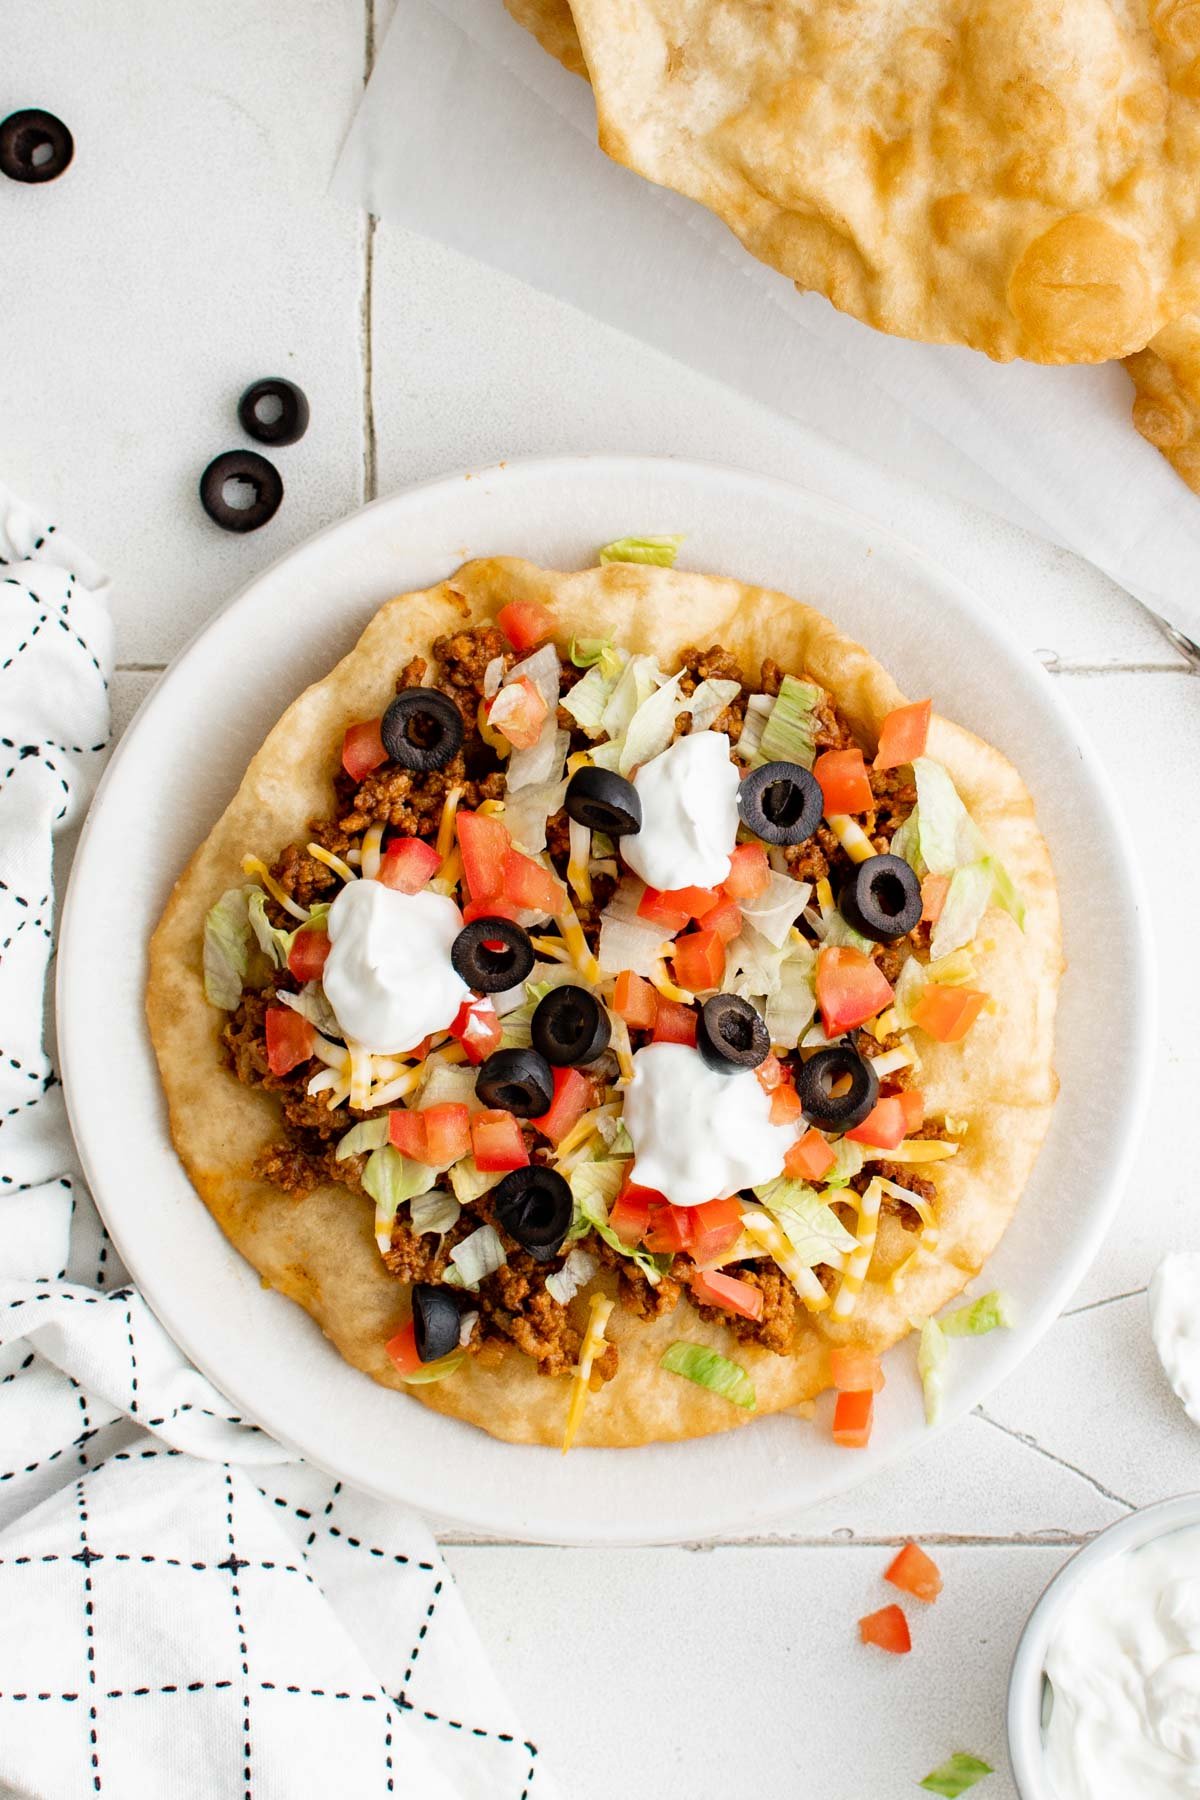 Fry bread taco with meat, cheese, sour cream and tomatoes.